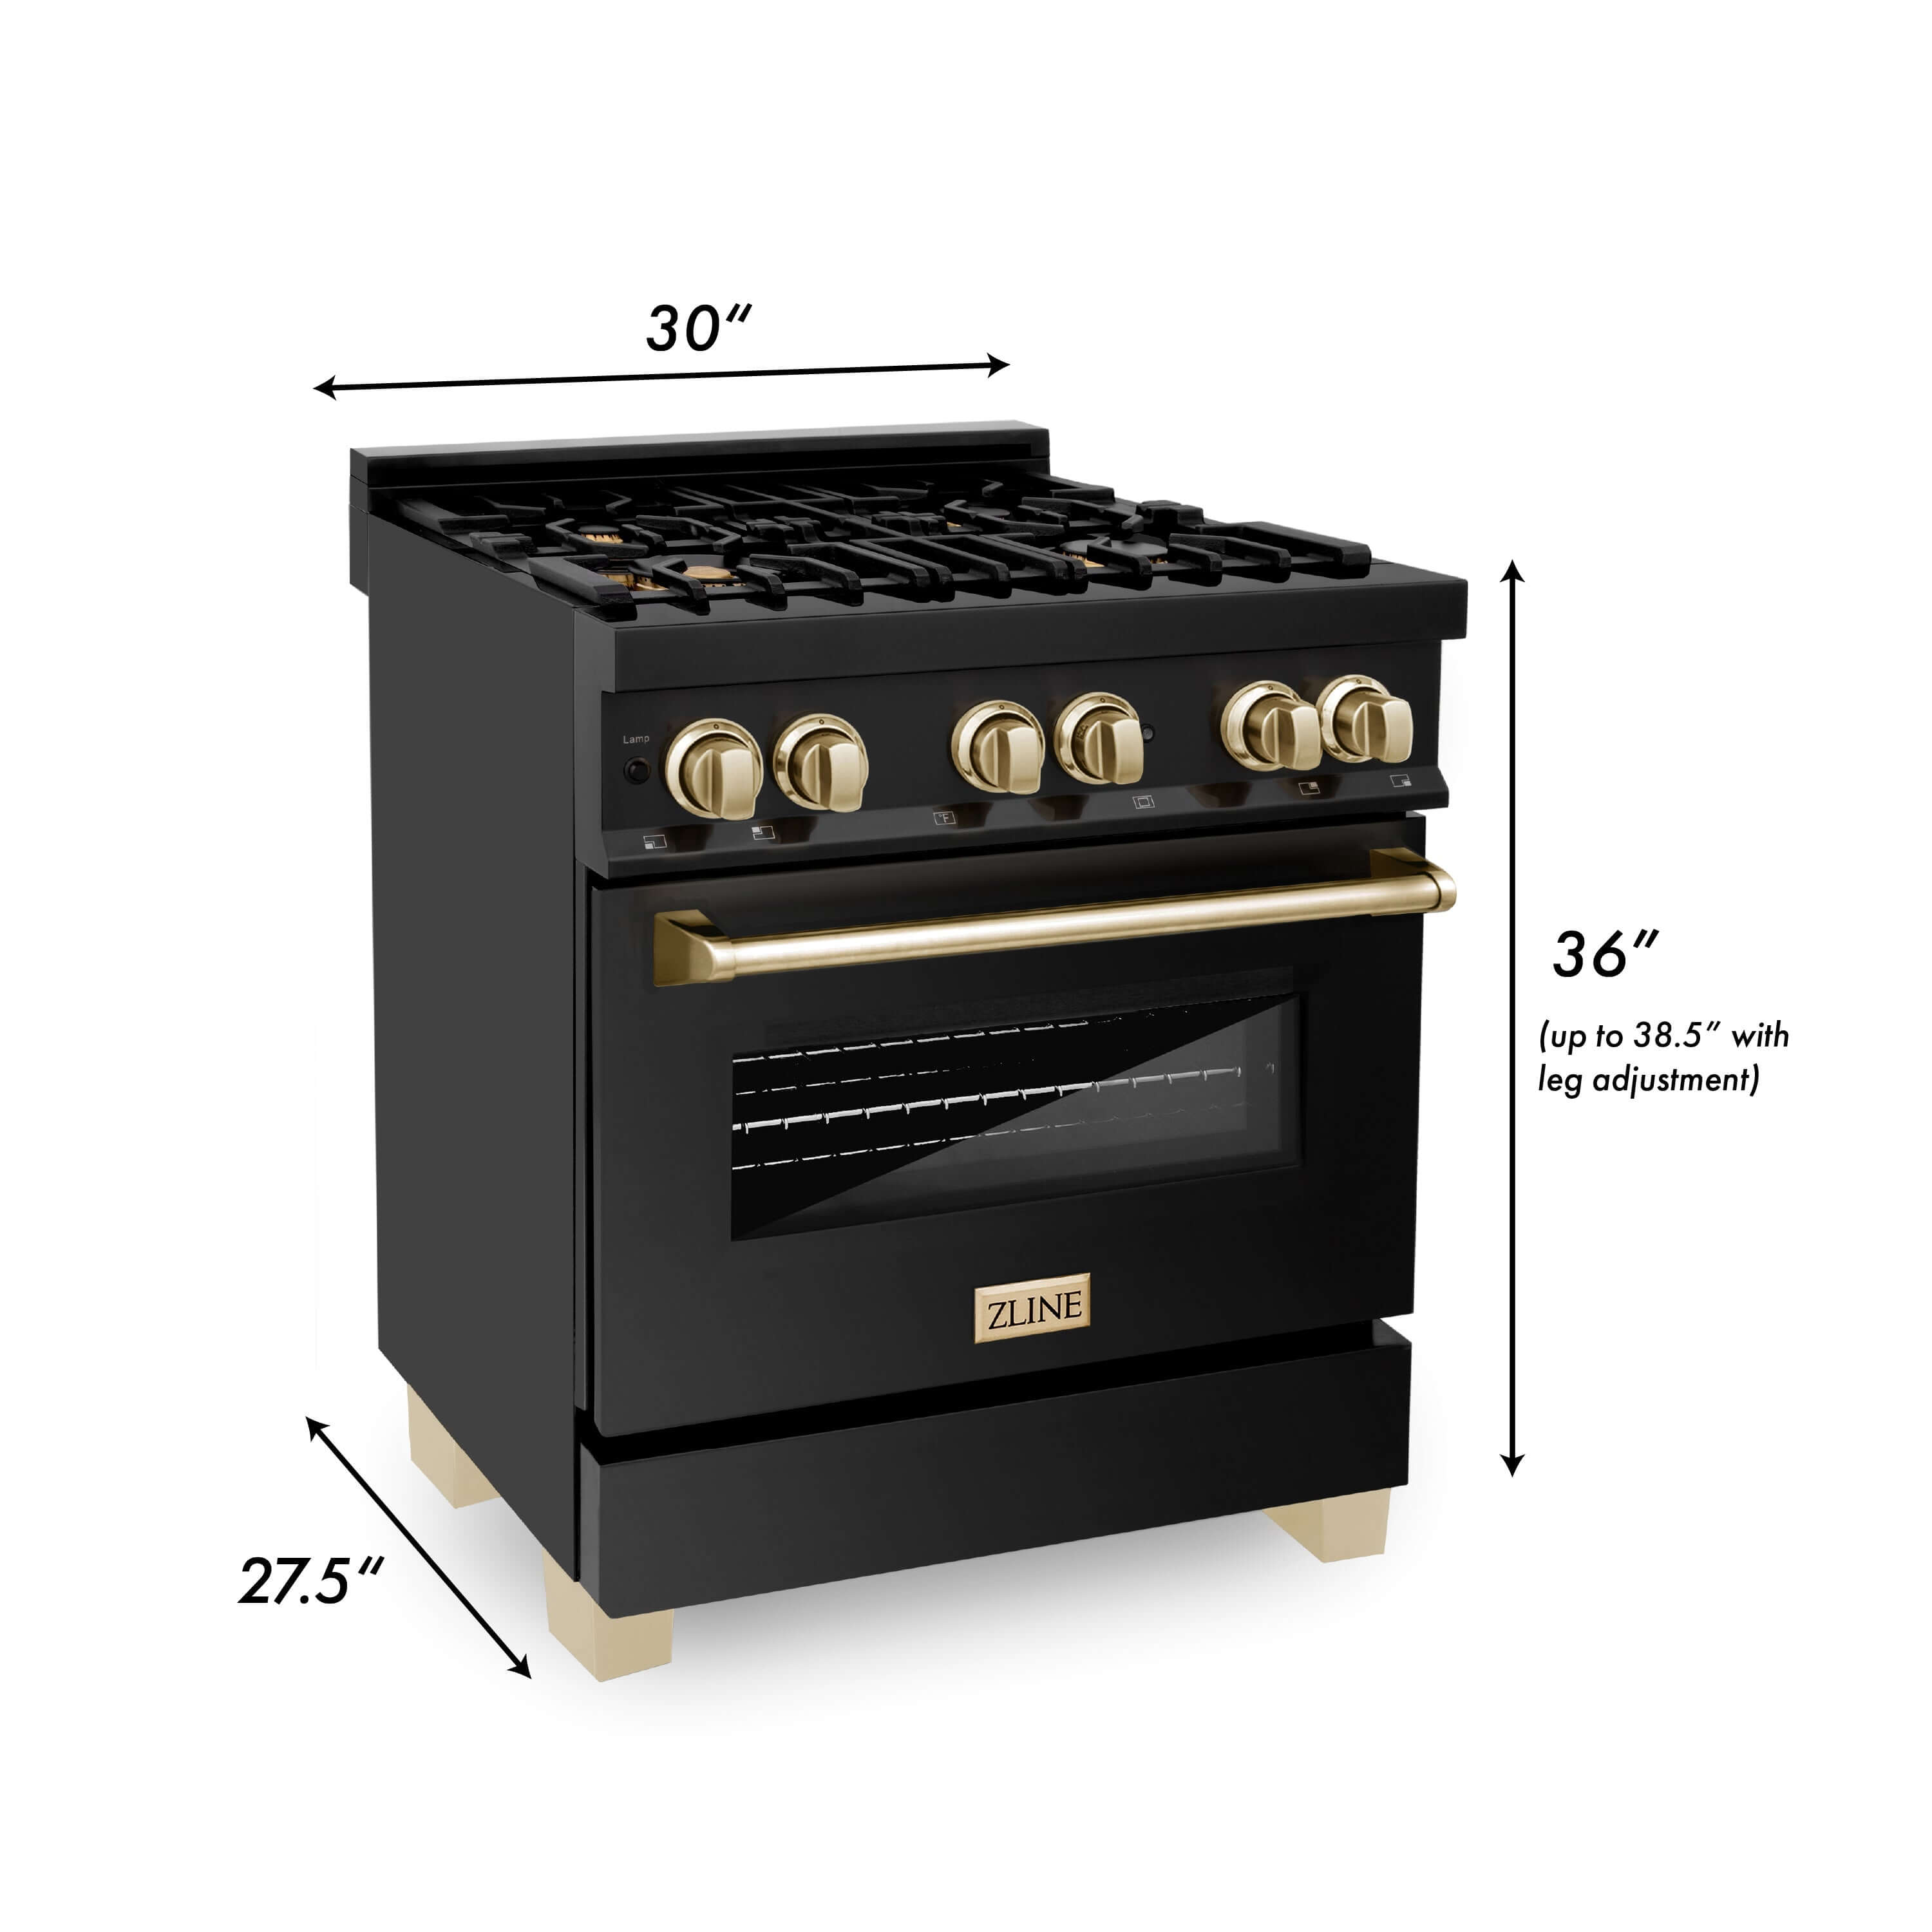 ZLINE 30" Black Stainless Steel Dual Fuel Range with Polished Gold accents dimensions.